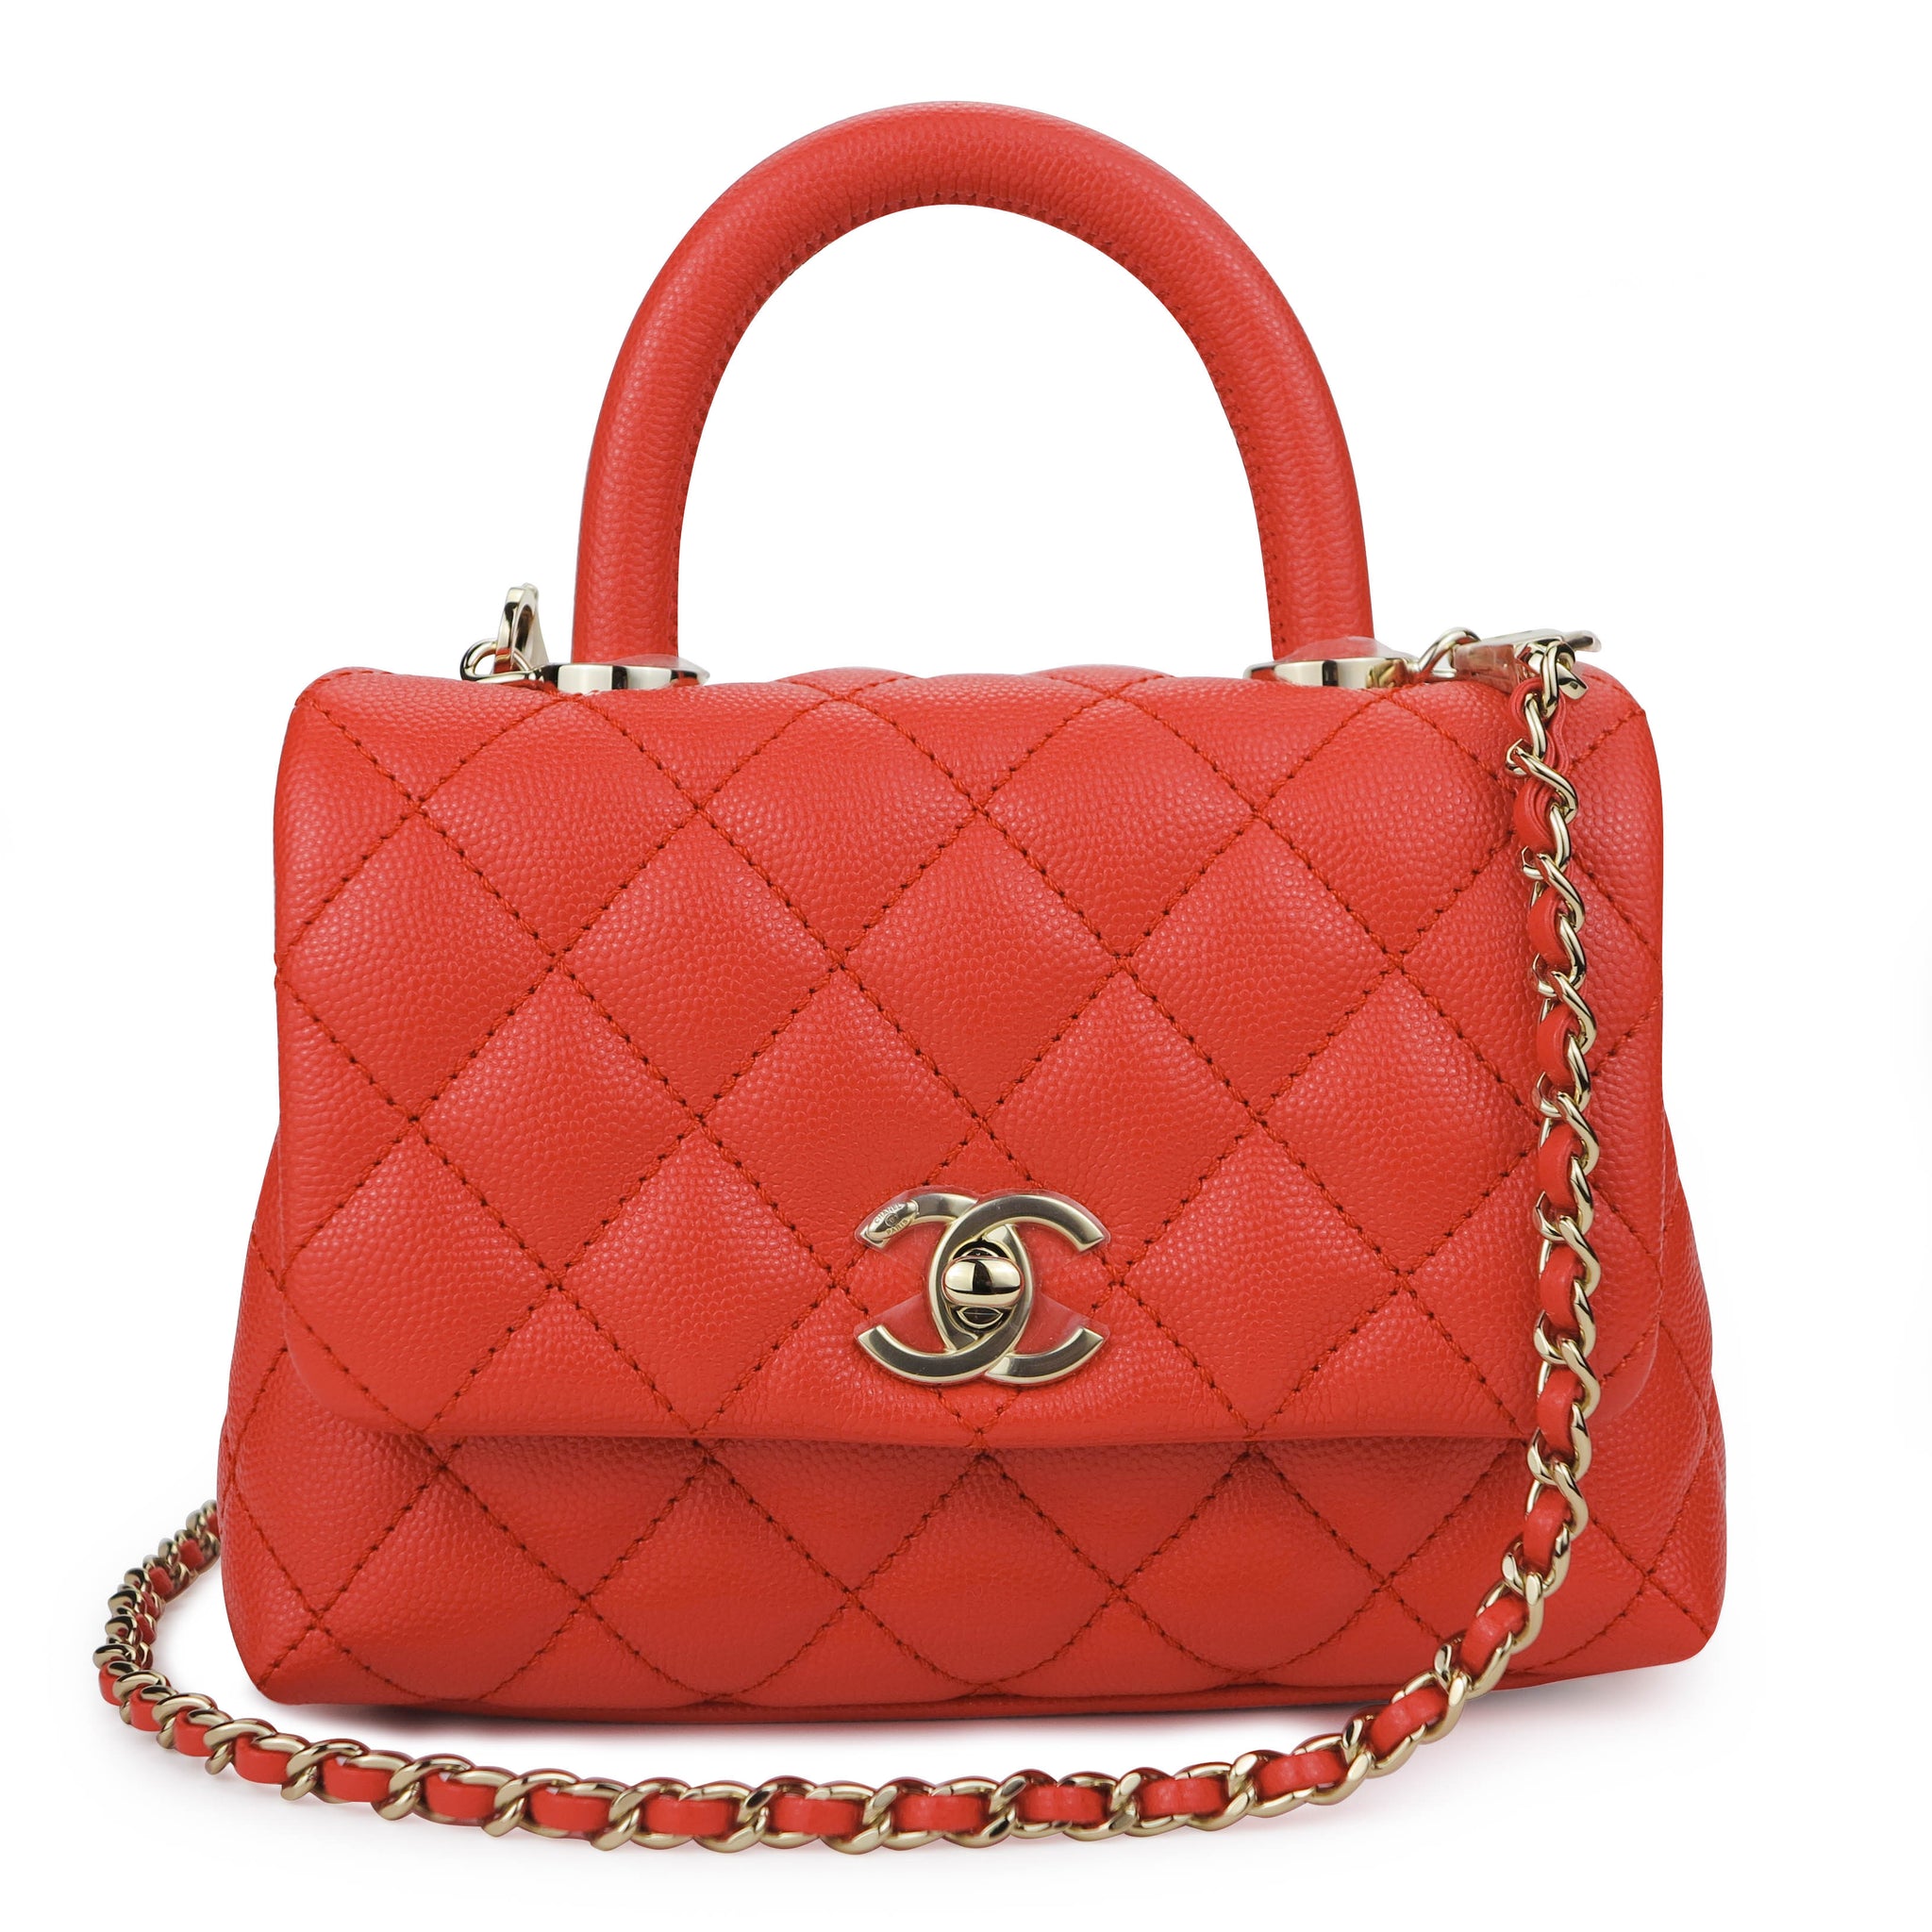 Top 31+ imagen chanel coral red